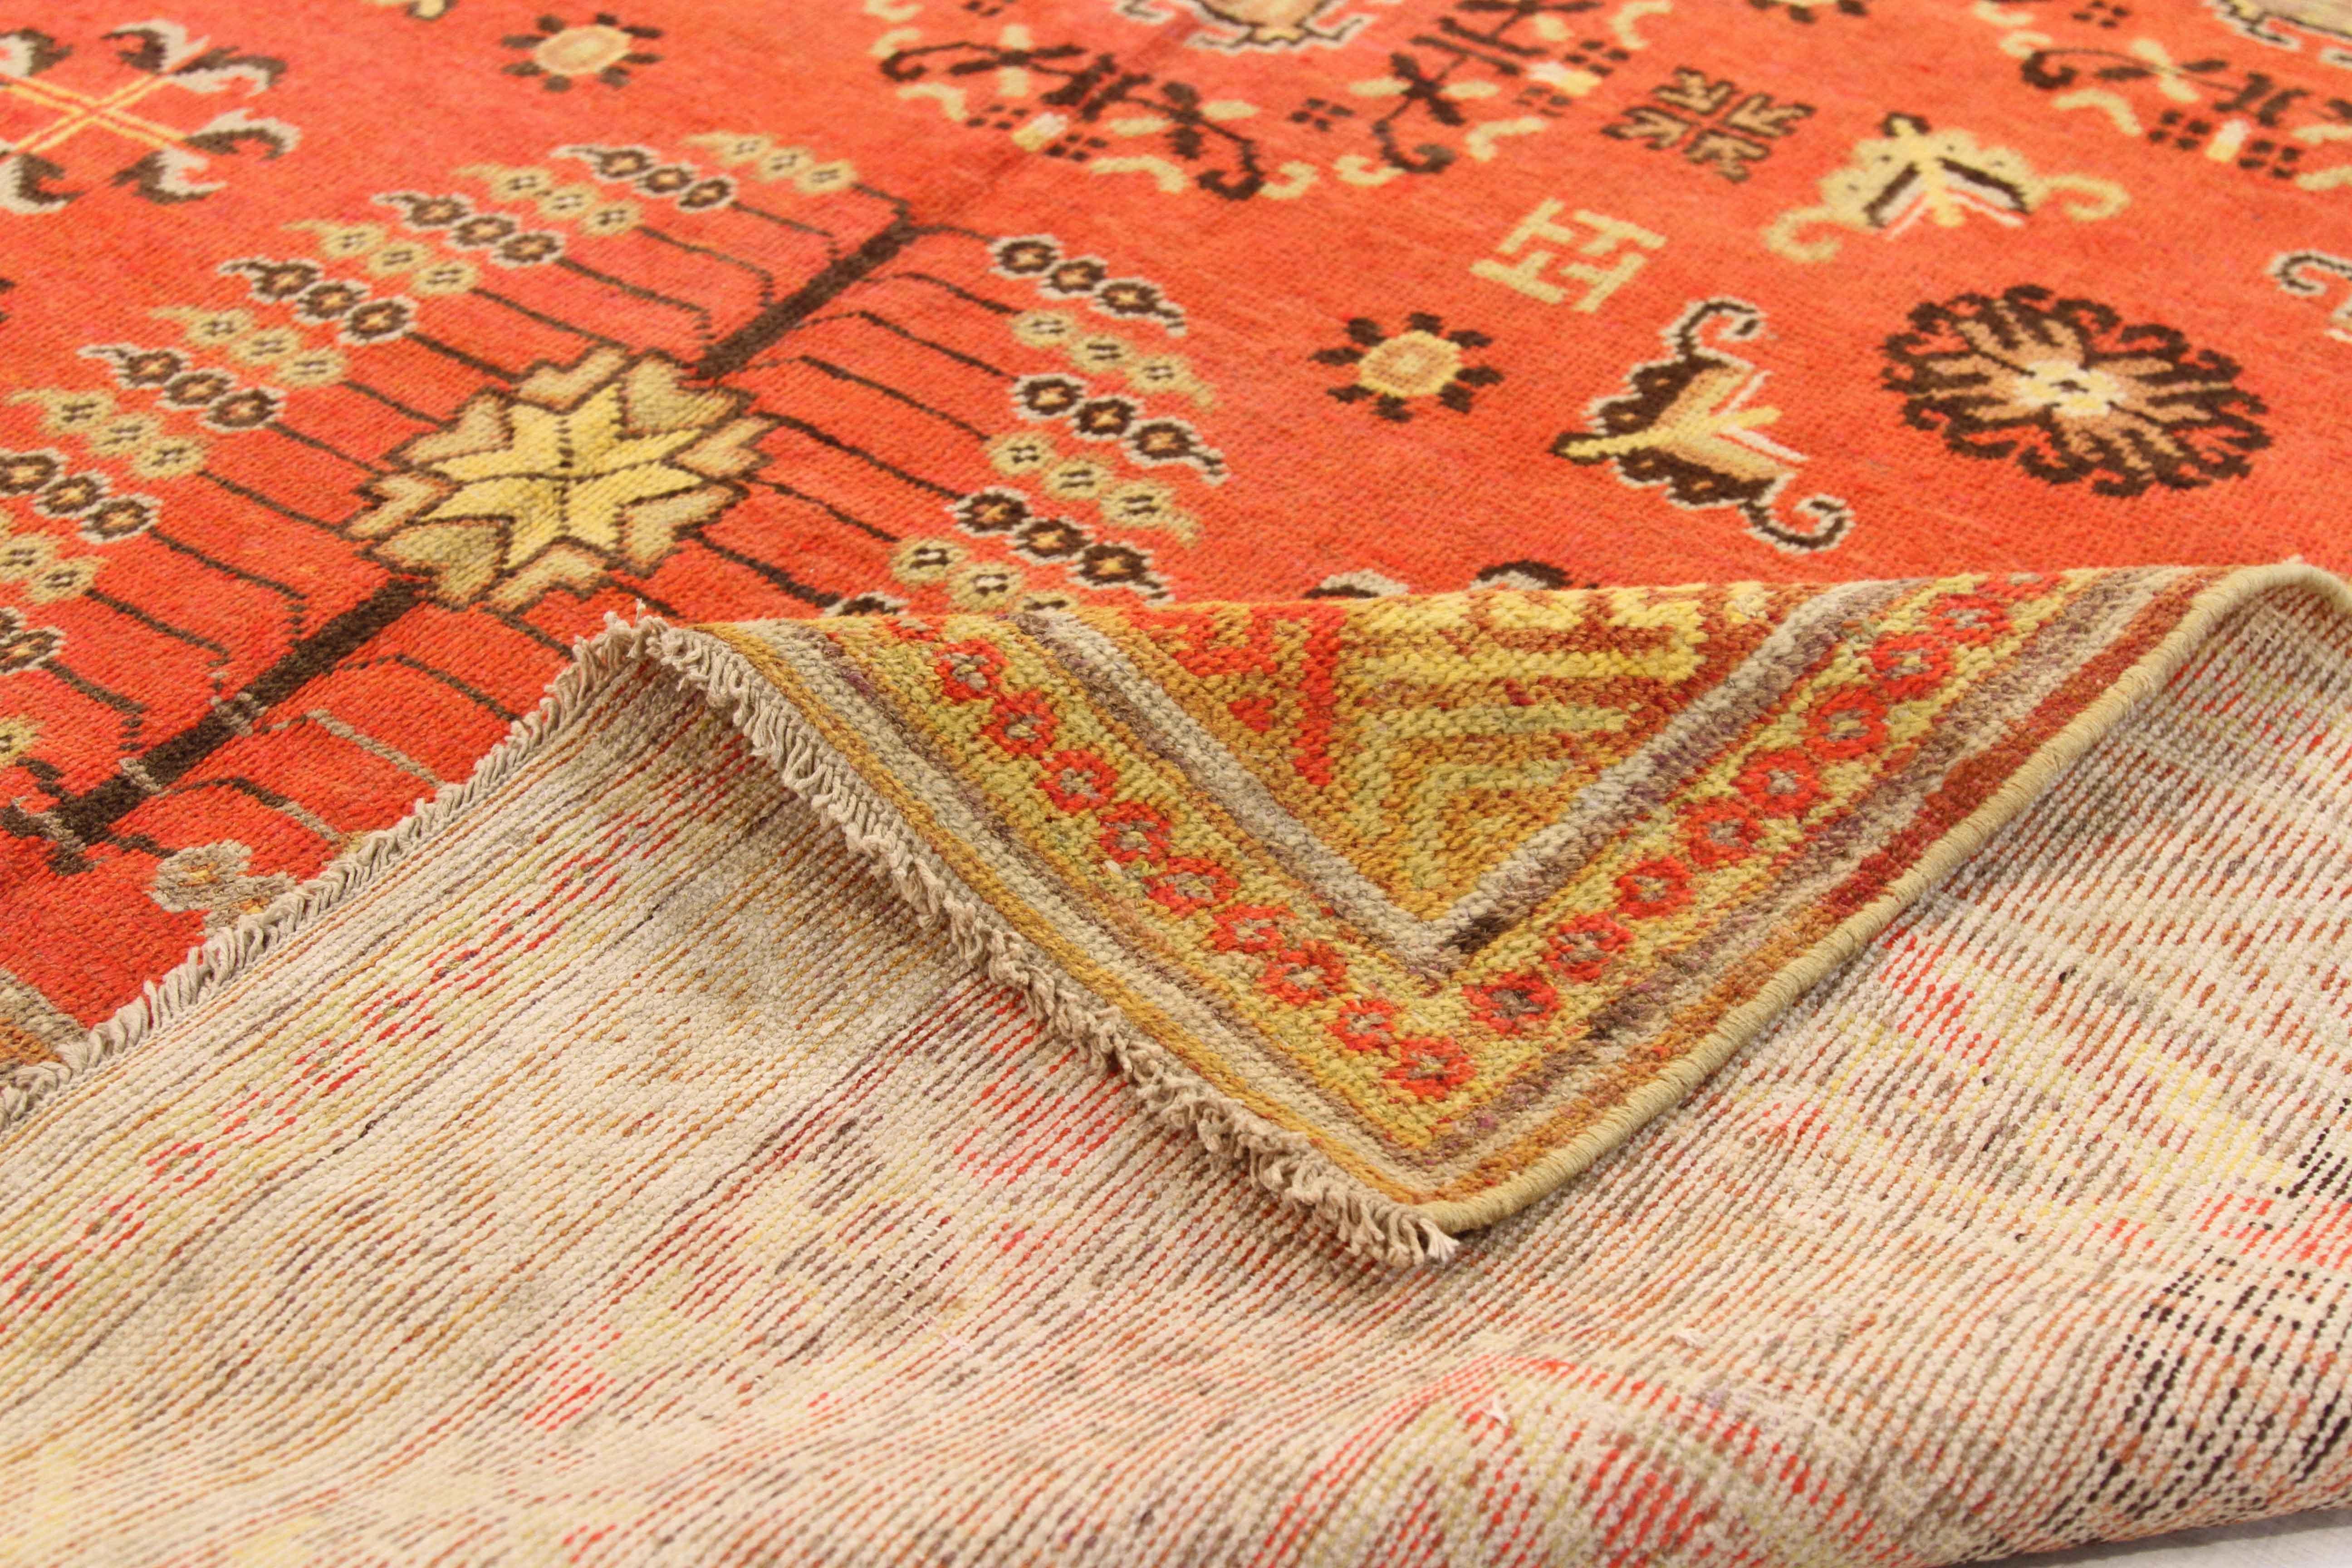 Antique Central Asian rug crafted from finest wool and natural dyes in the region using hand weaving techniques perfected by Khotan weavers. It features lovely oriental figures on the centre field surrounded by traditional and tribal geometric